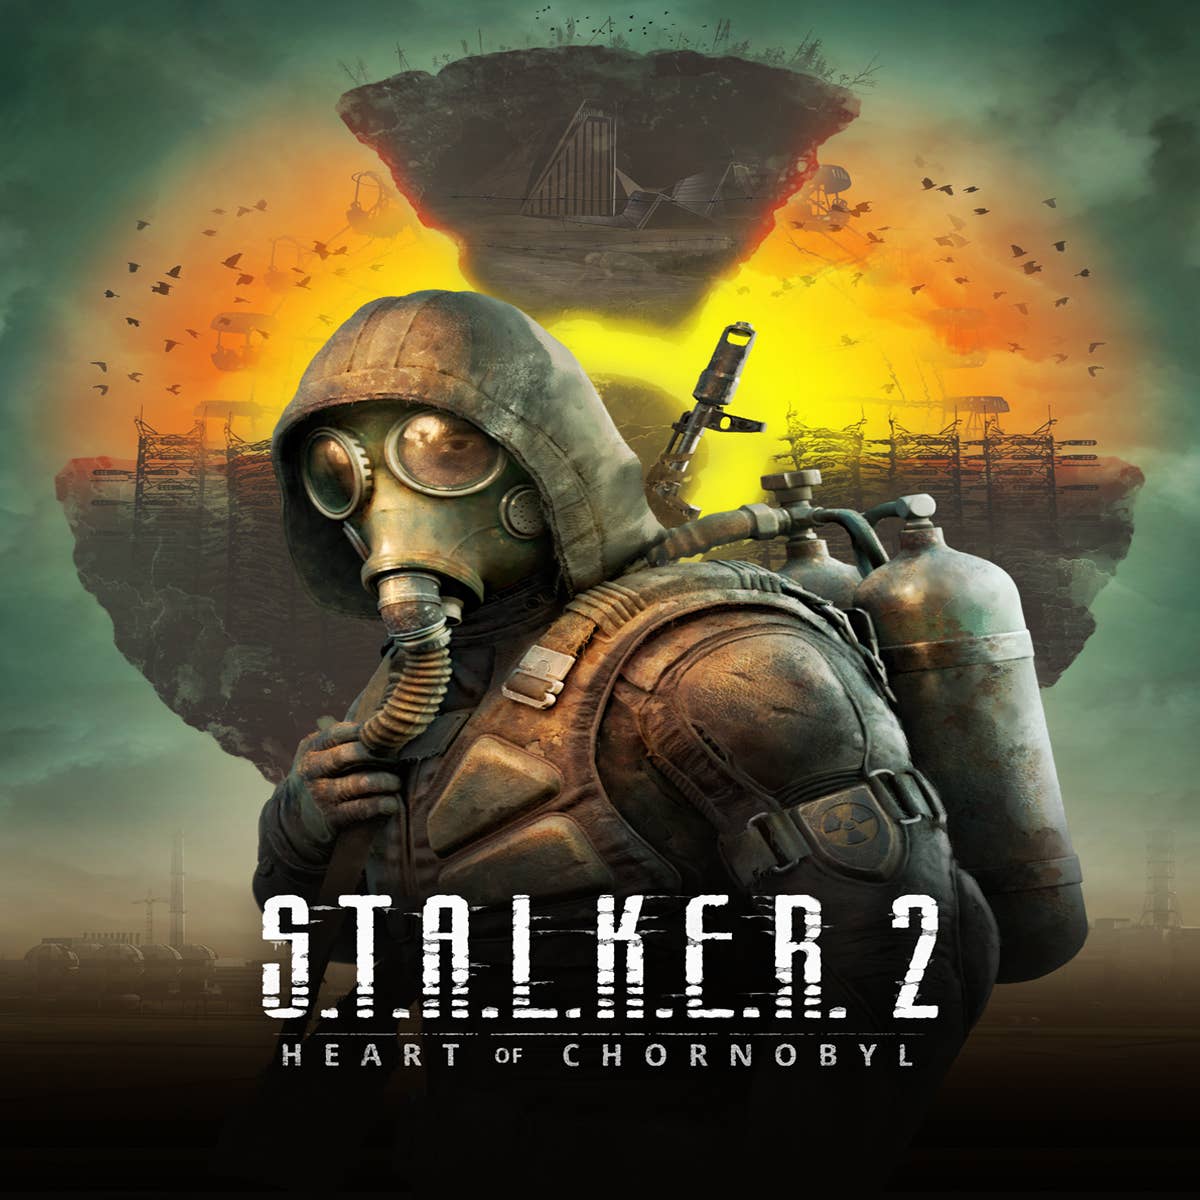 S.T.A.L.K.E.R. 2 is getting NFTs, including one that lets you